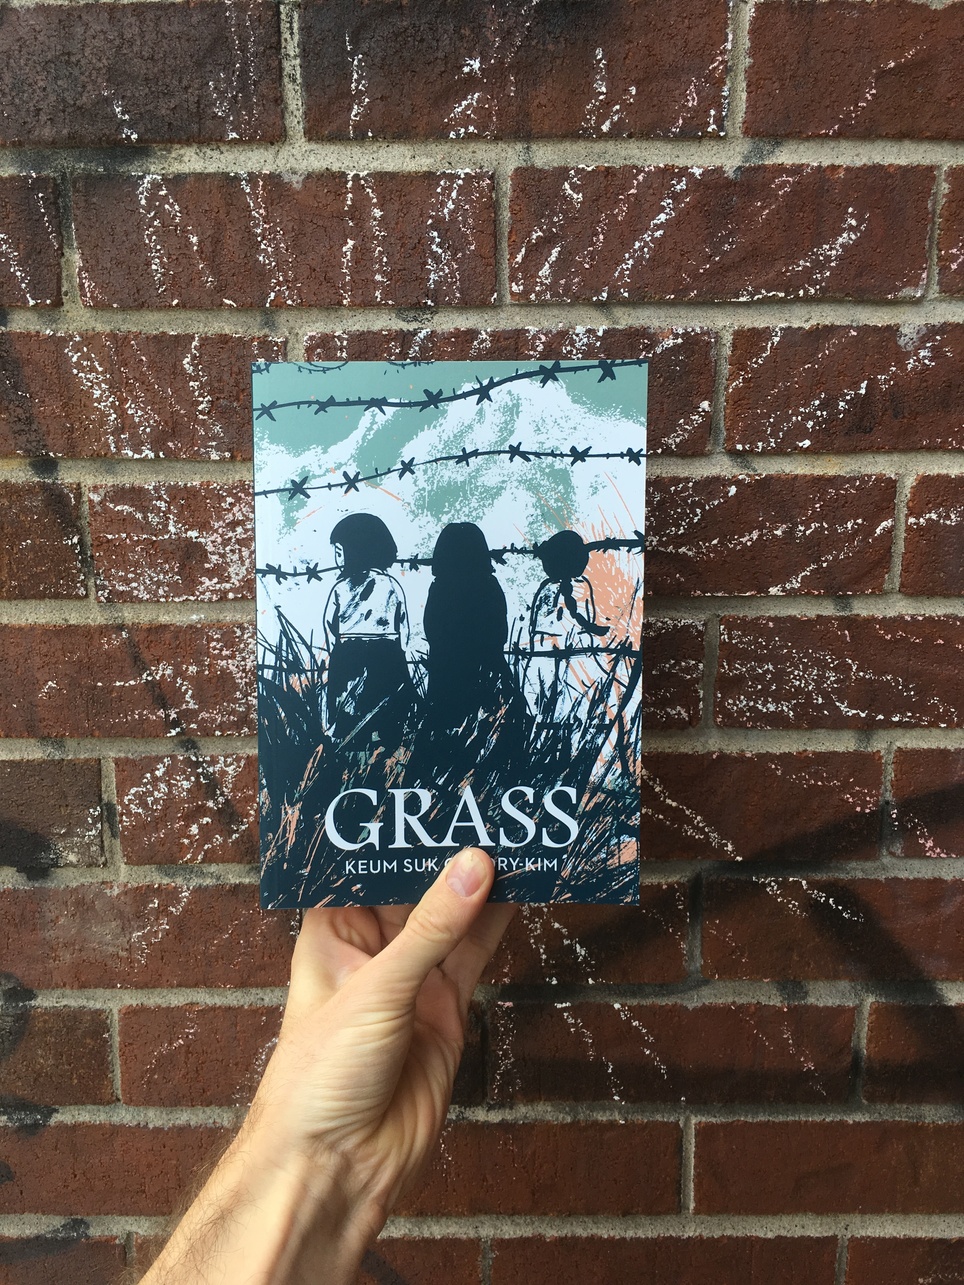 New D+Q: Grass is in stores today!